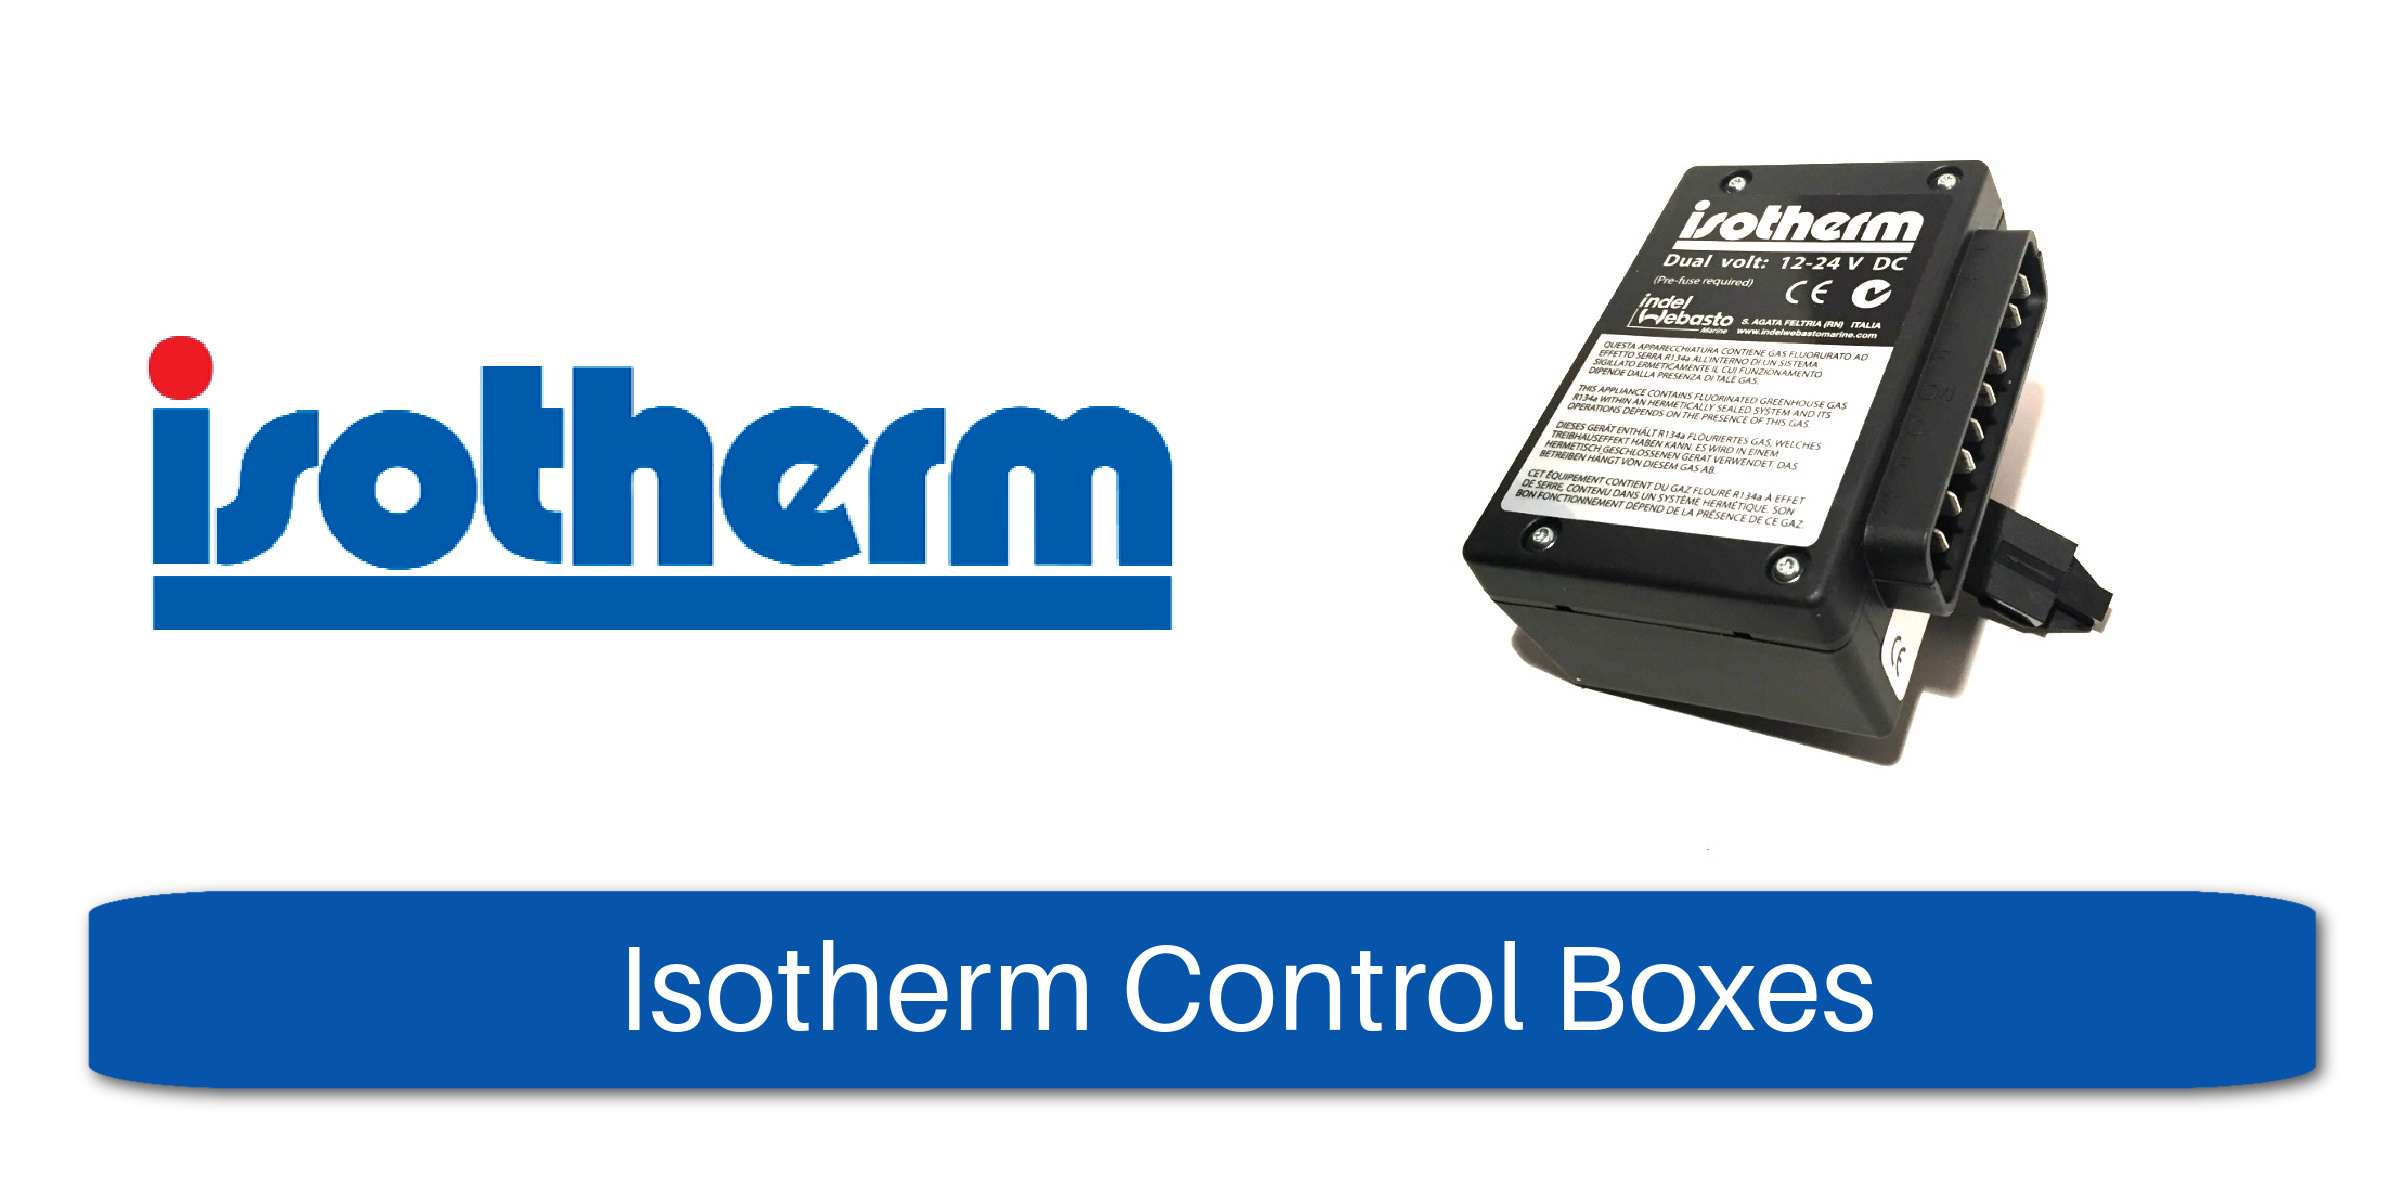 Isotherm Control Boxes